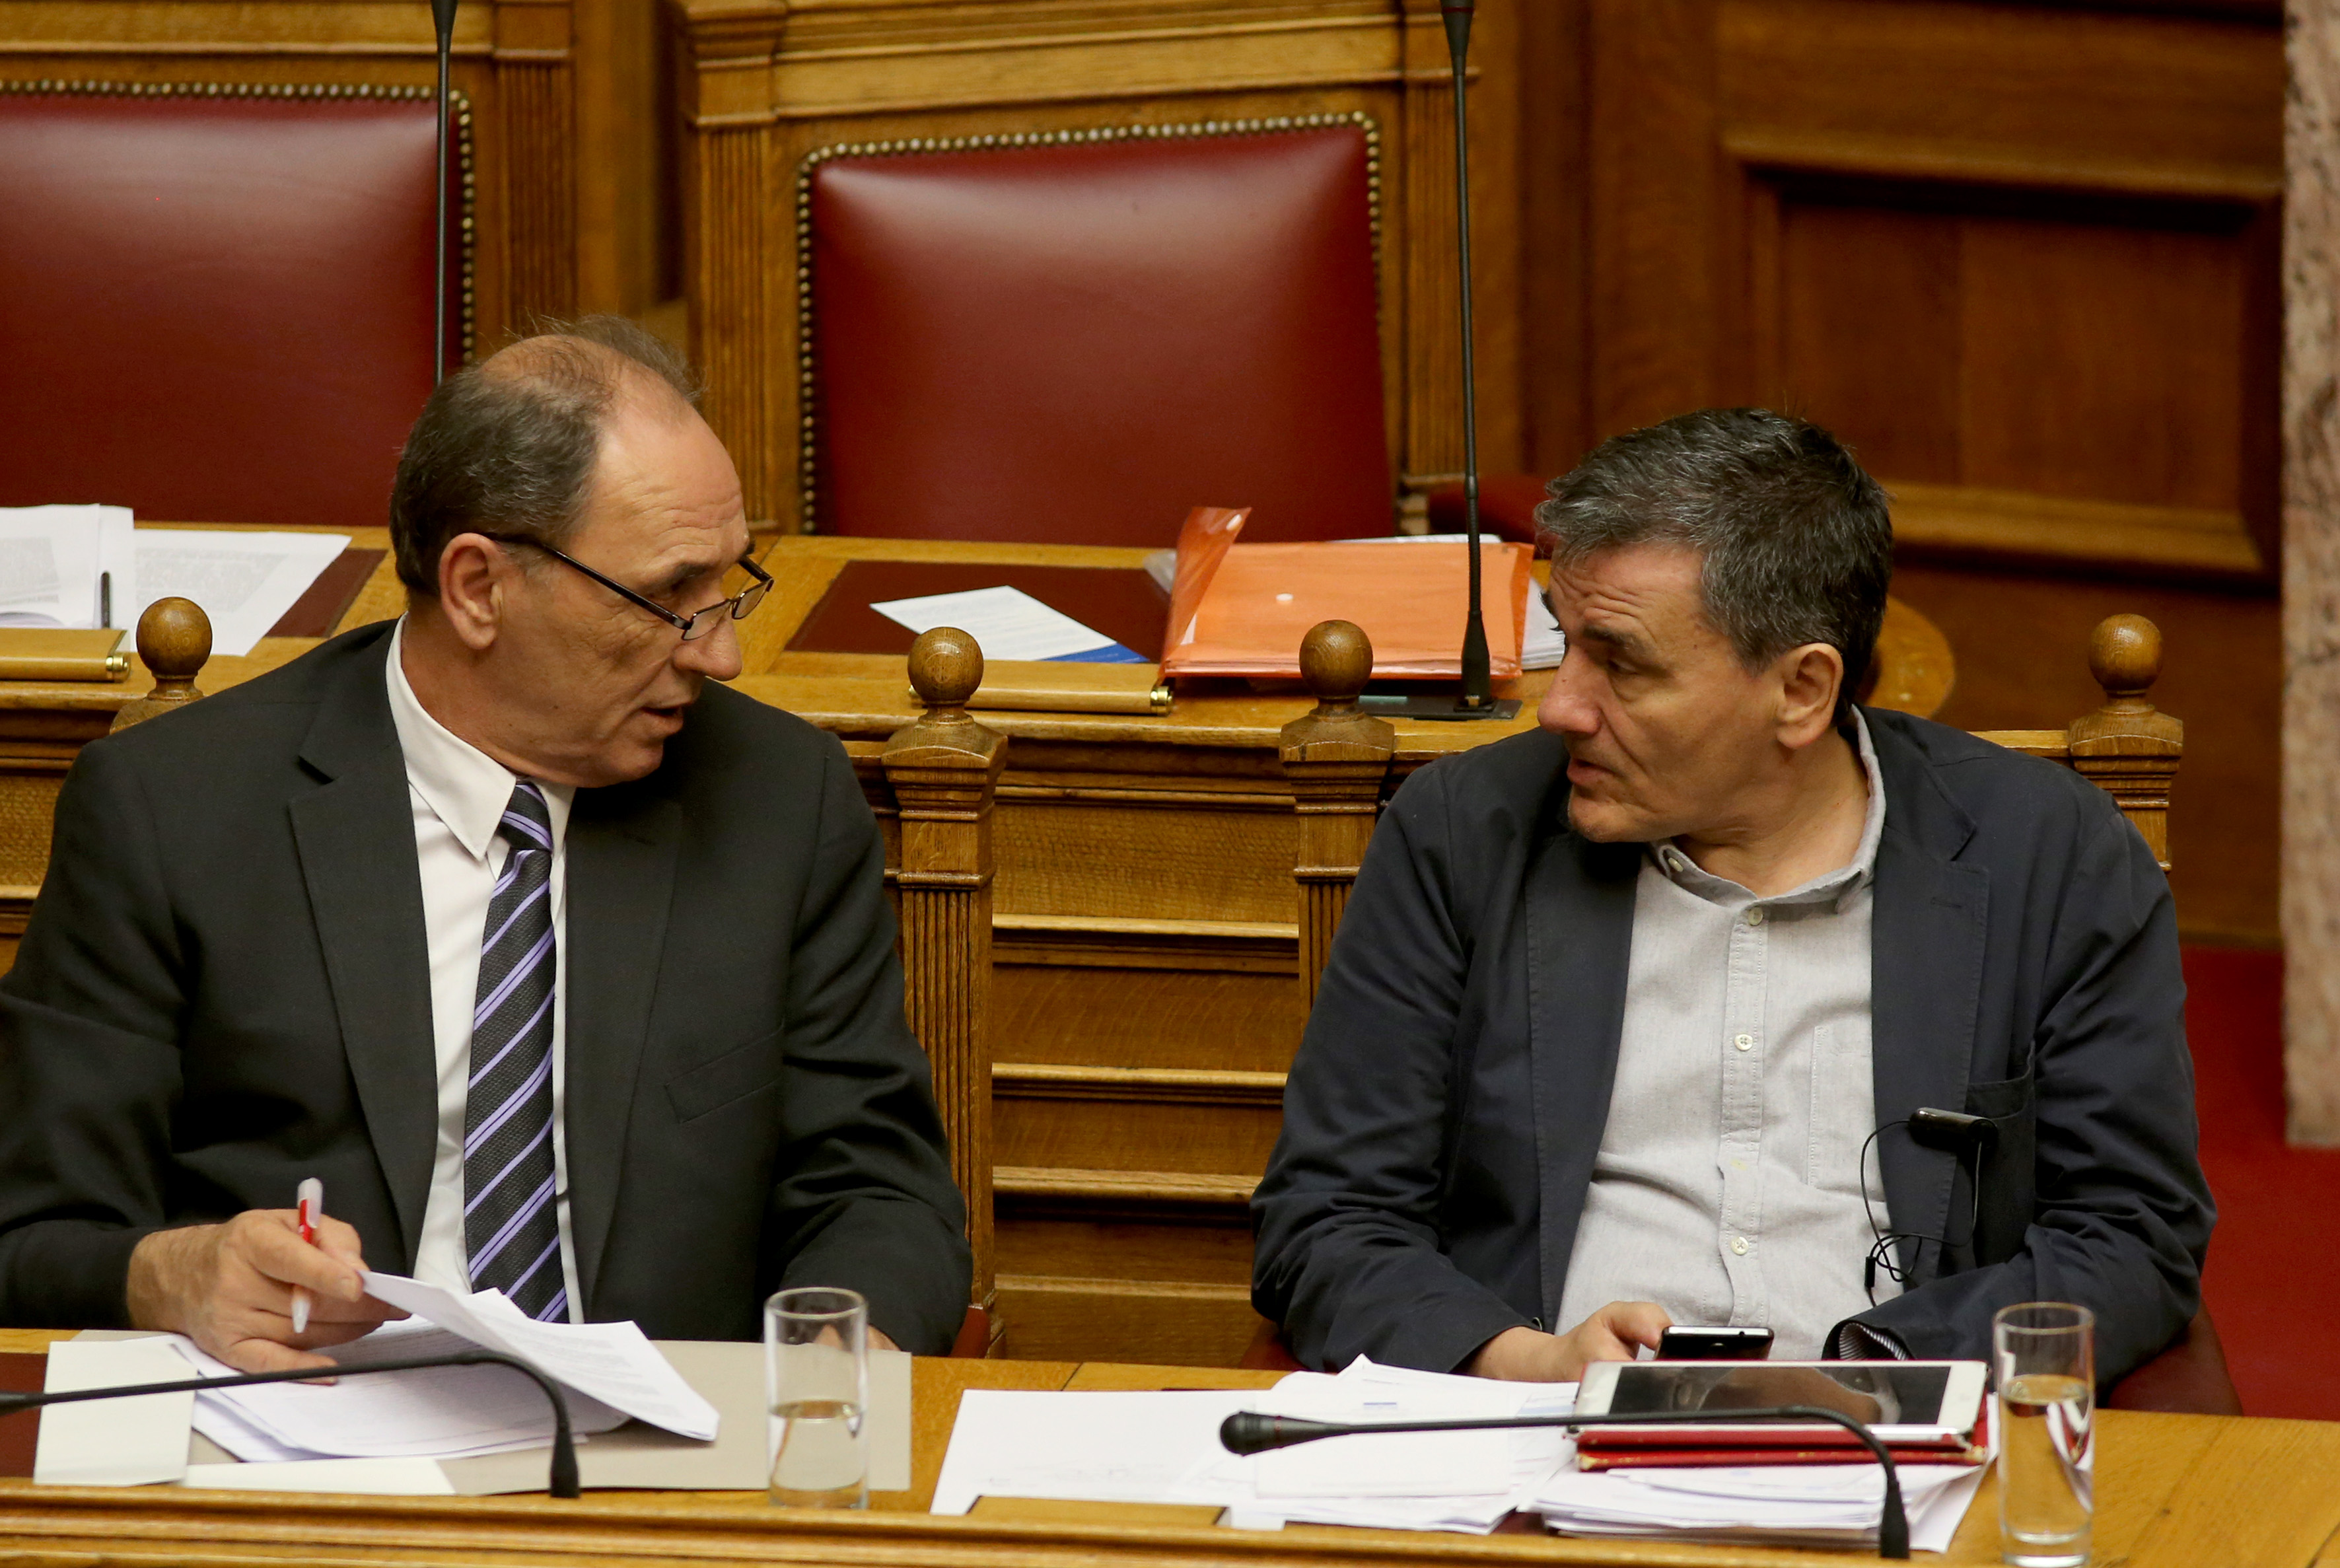 Brussels: Tsakalotos – Stathakis – Ahtsioglou have 48hours to close the deal with creditors